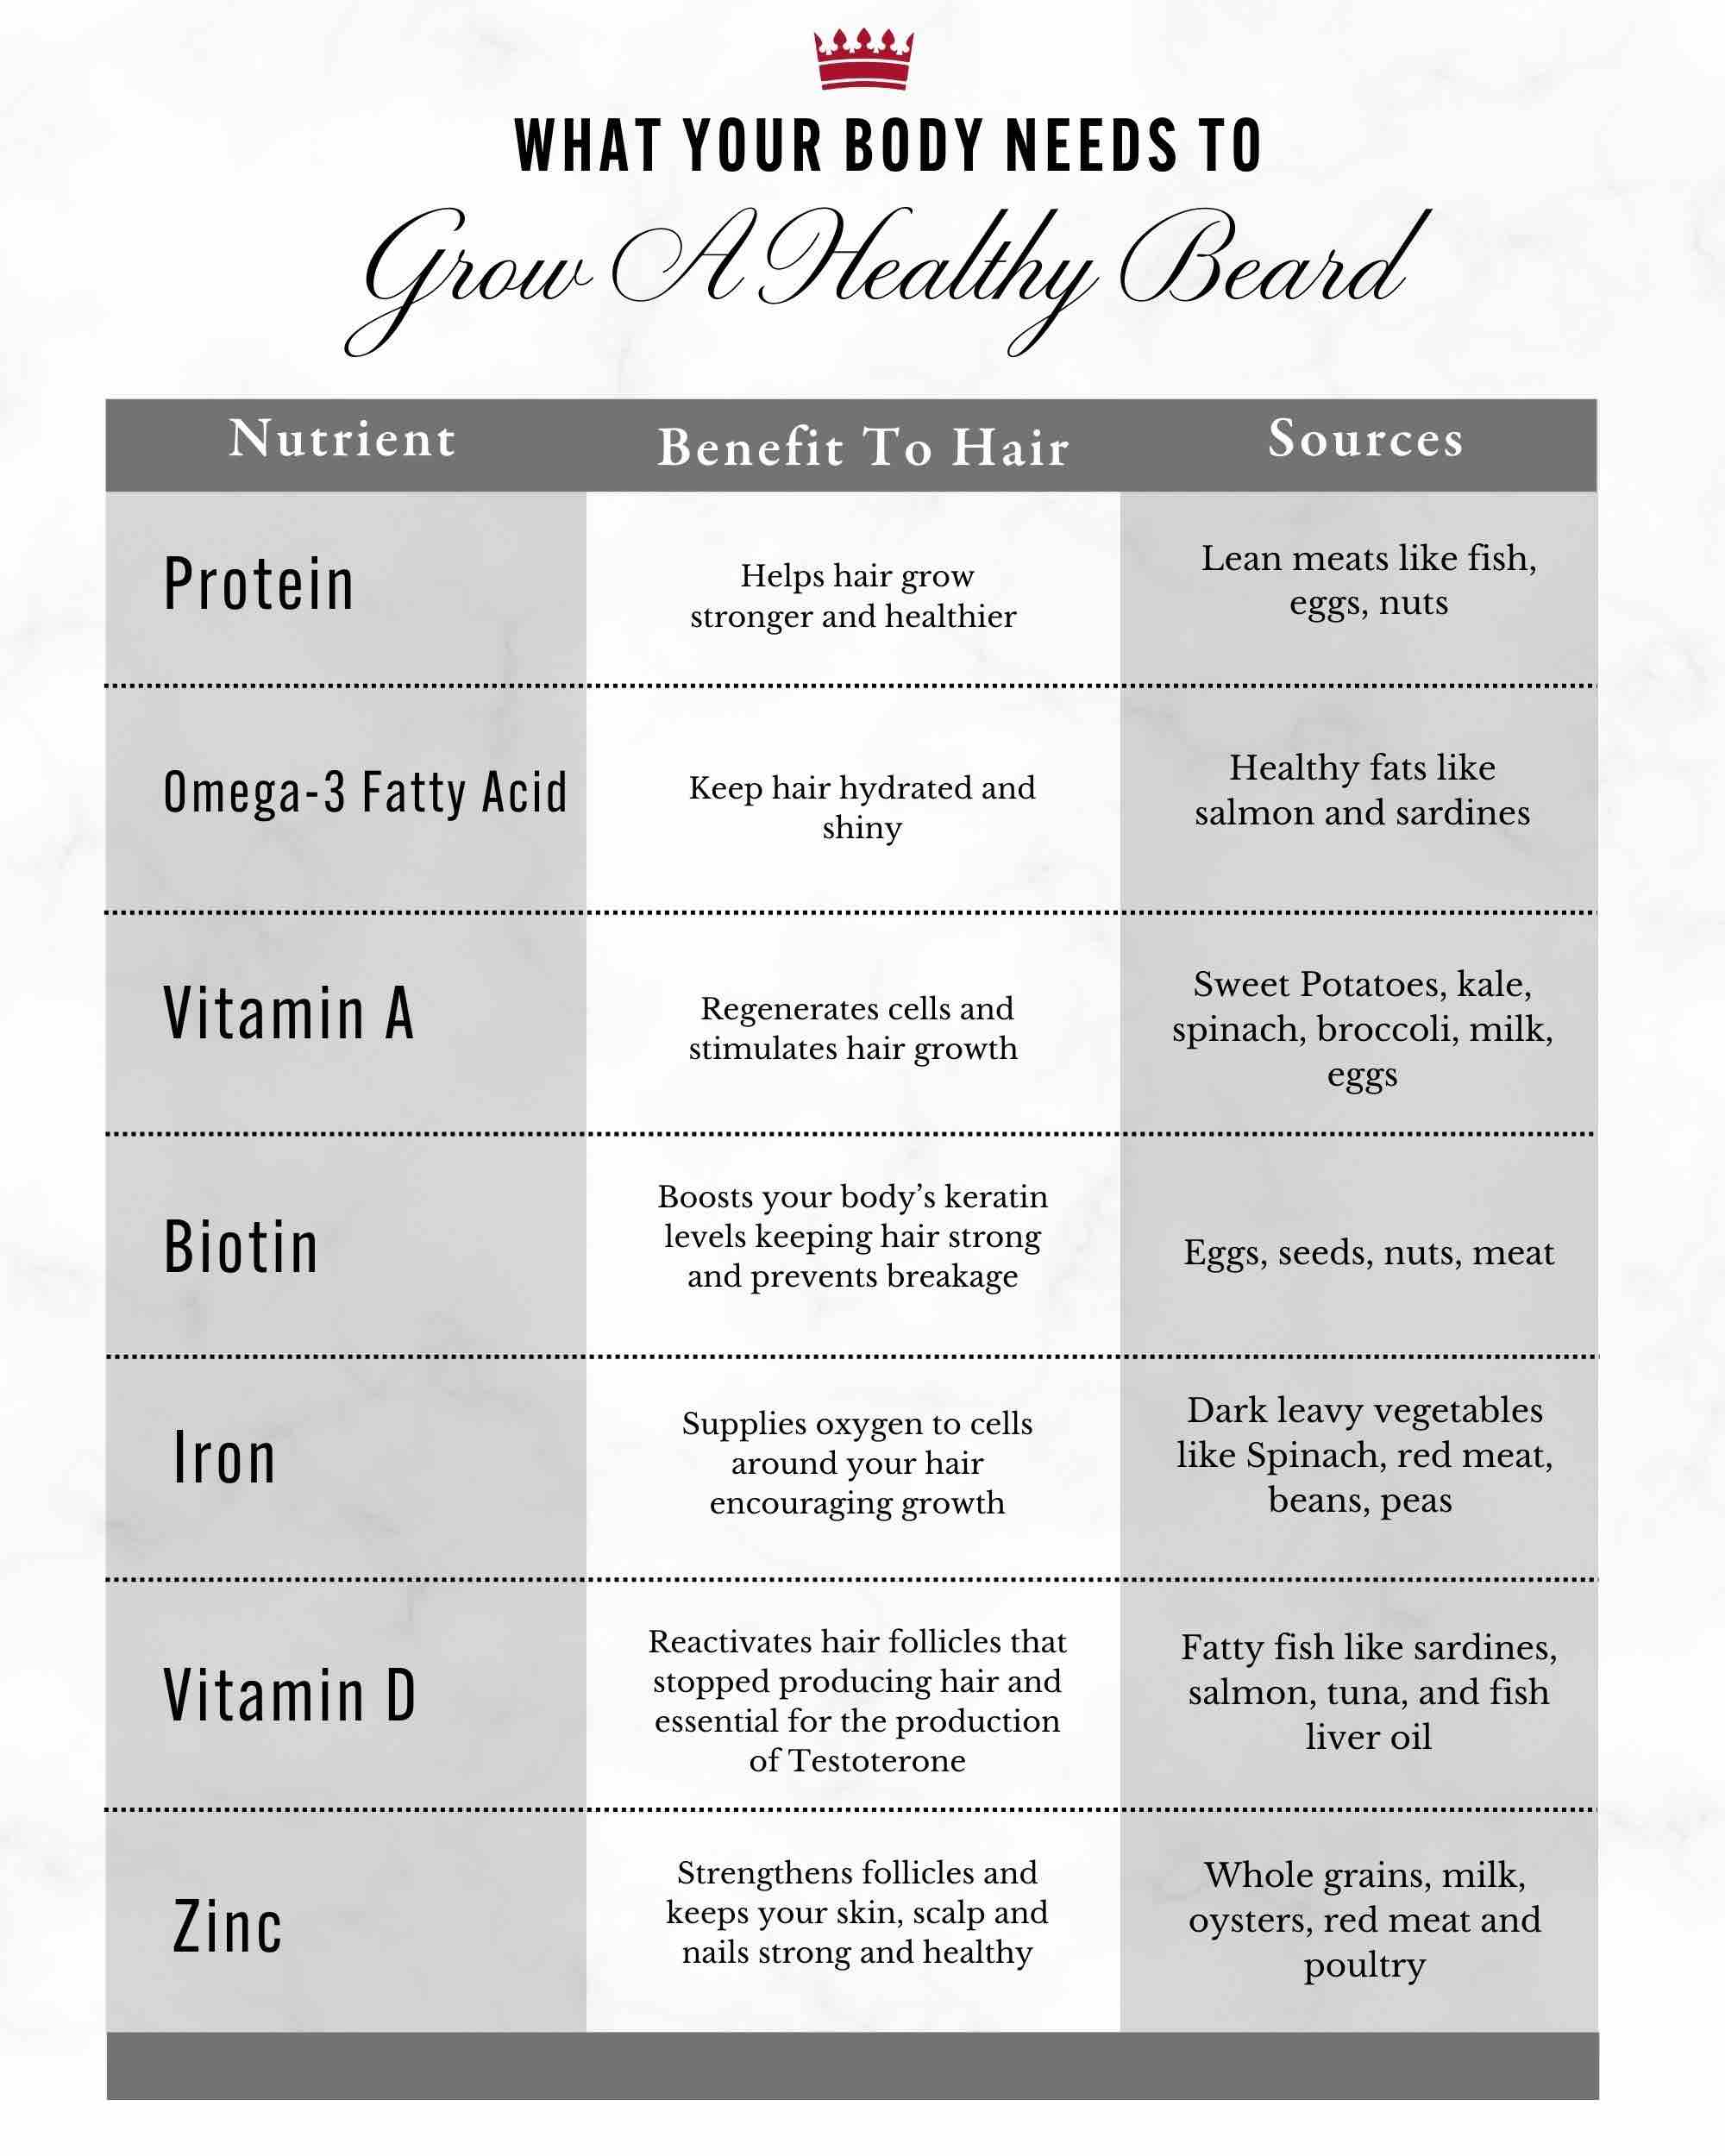 chart of what your body needs to grow a healthy beard